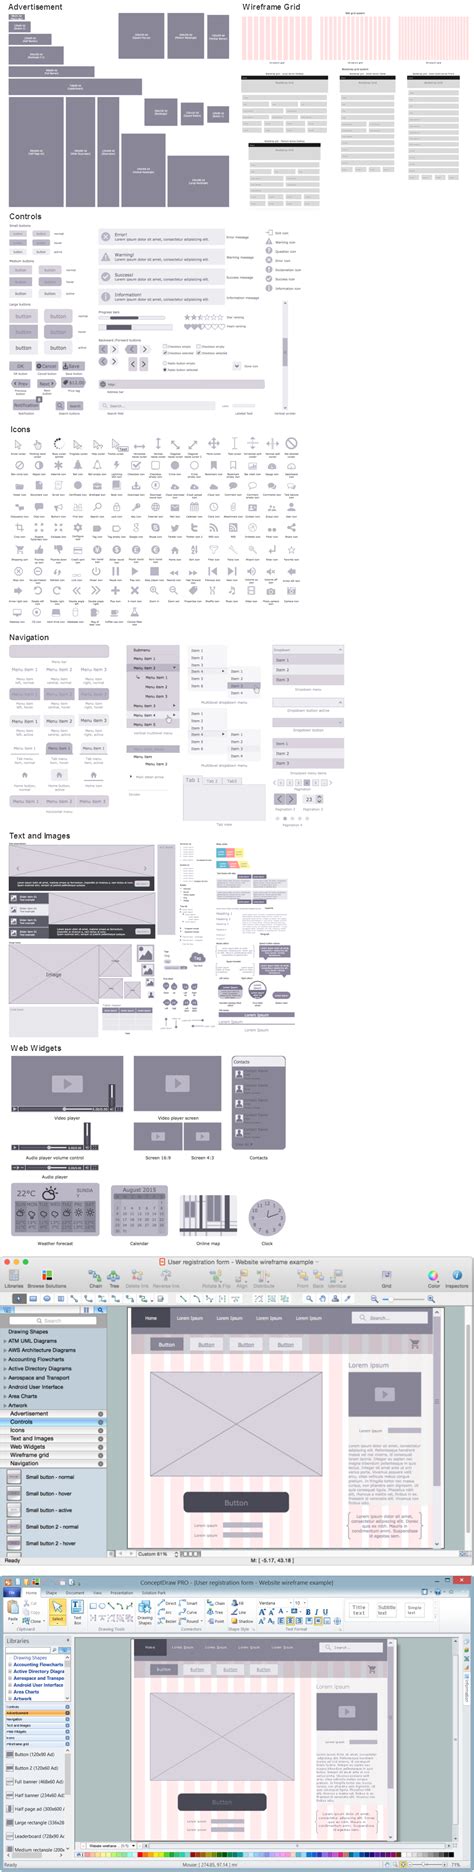 Wireframing How To Develop Website Wireframes Using Conceptdraw Pro